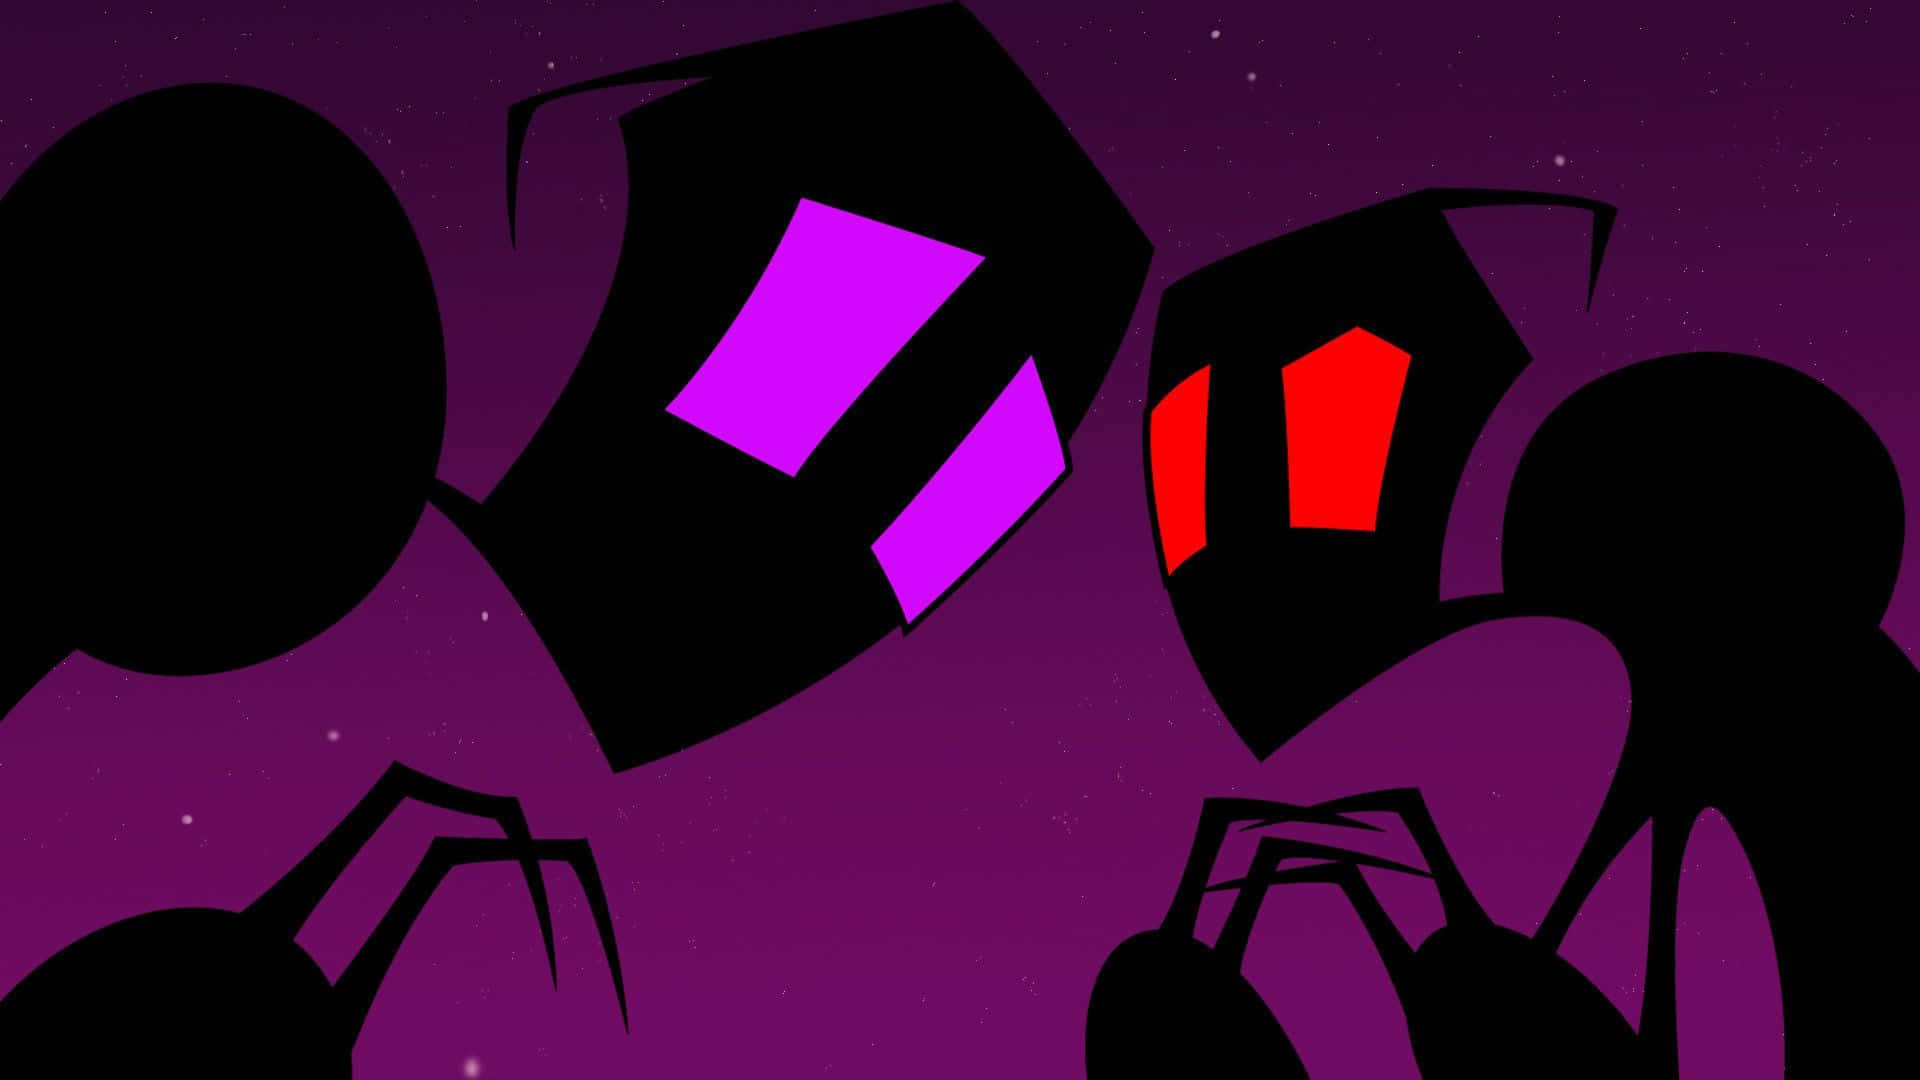 Invader Zim and Gir standing in an apocalyptic city- Artistic 1920x1080 Desktop Wallpaper